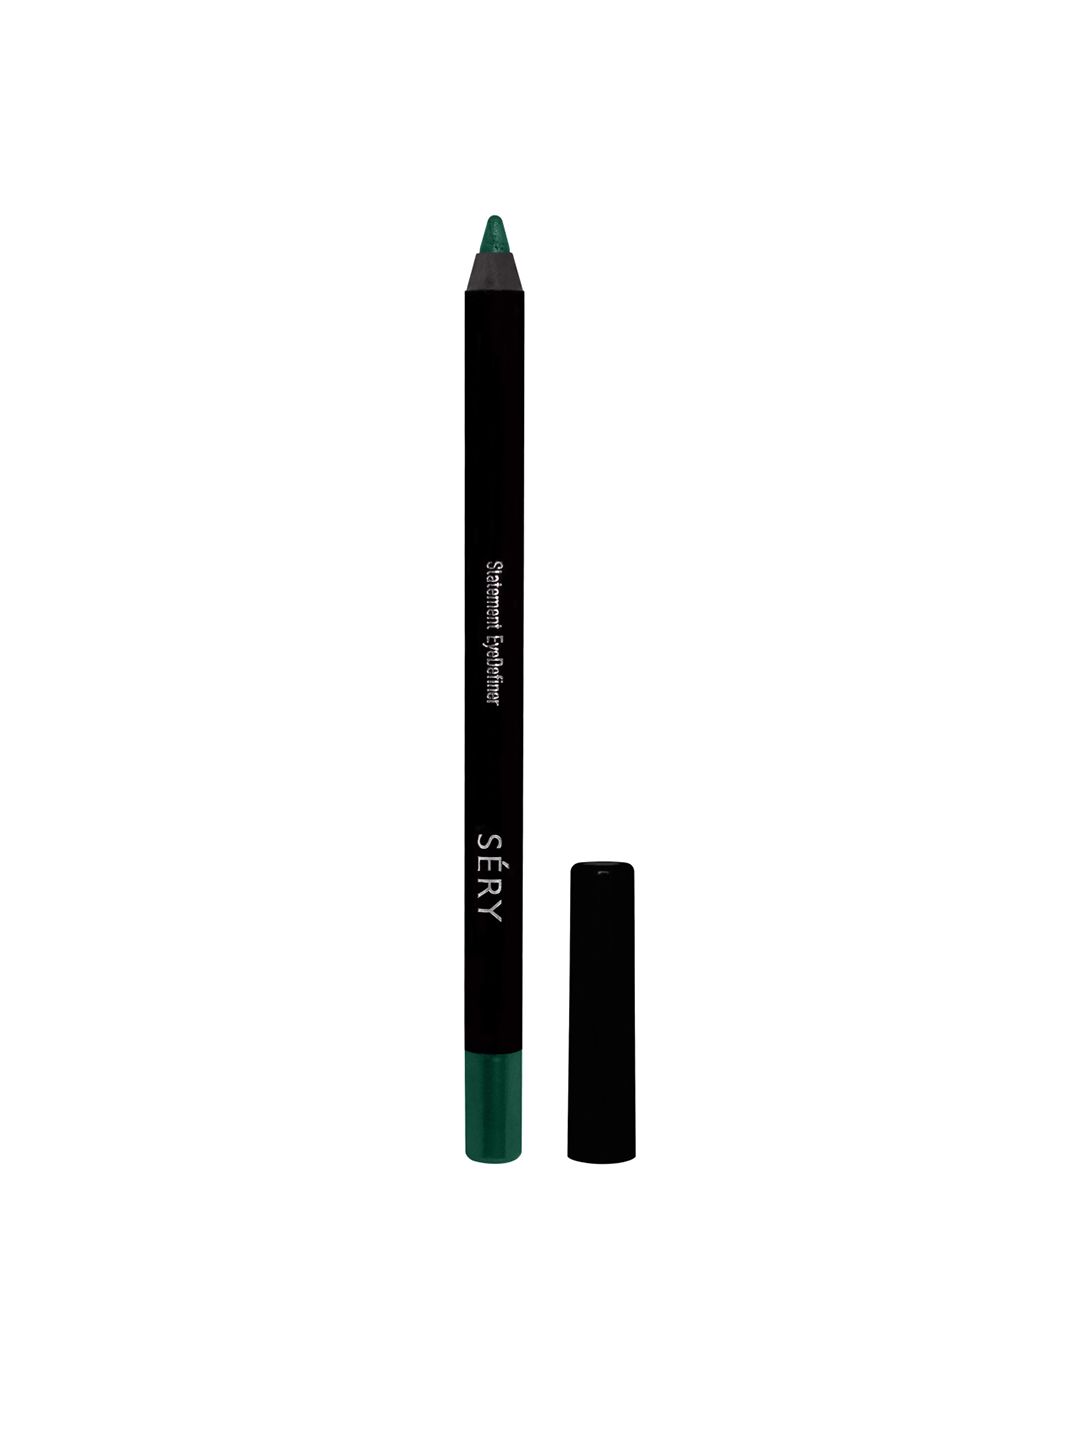 SERY Statement EyeDefiner 24 Hours Stay One Stroke Eyeliner Pencil - Sparkling Forest Price in India